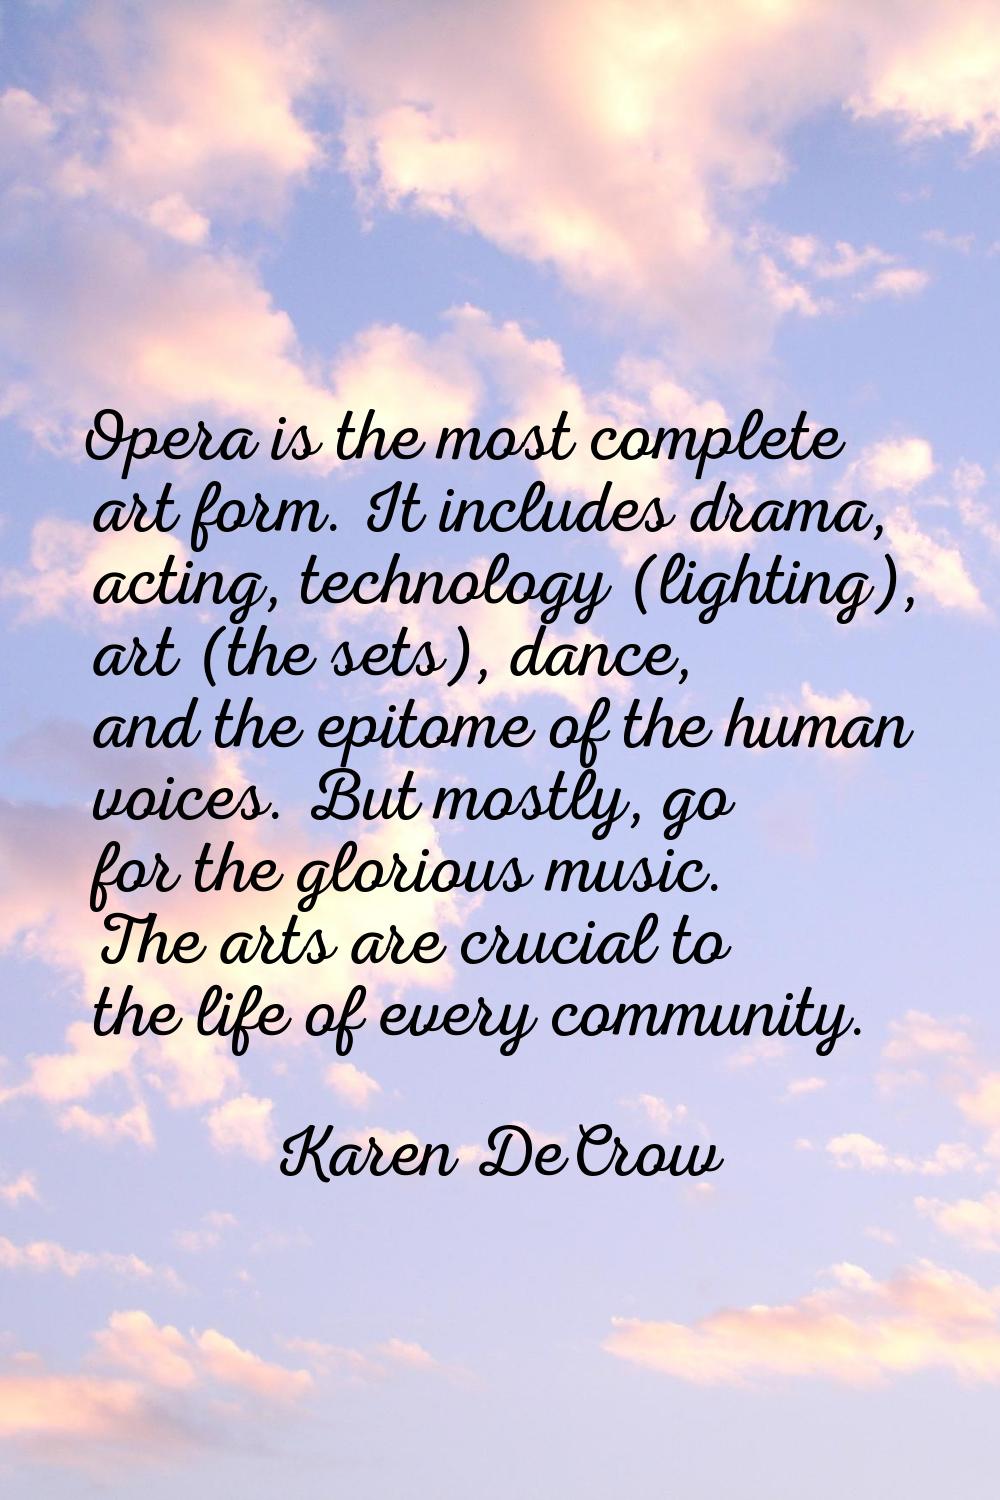 Opera is the most complete art form. It includes drama, acting, technology (lighting), art (the set